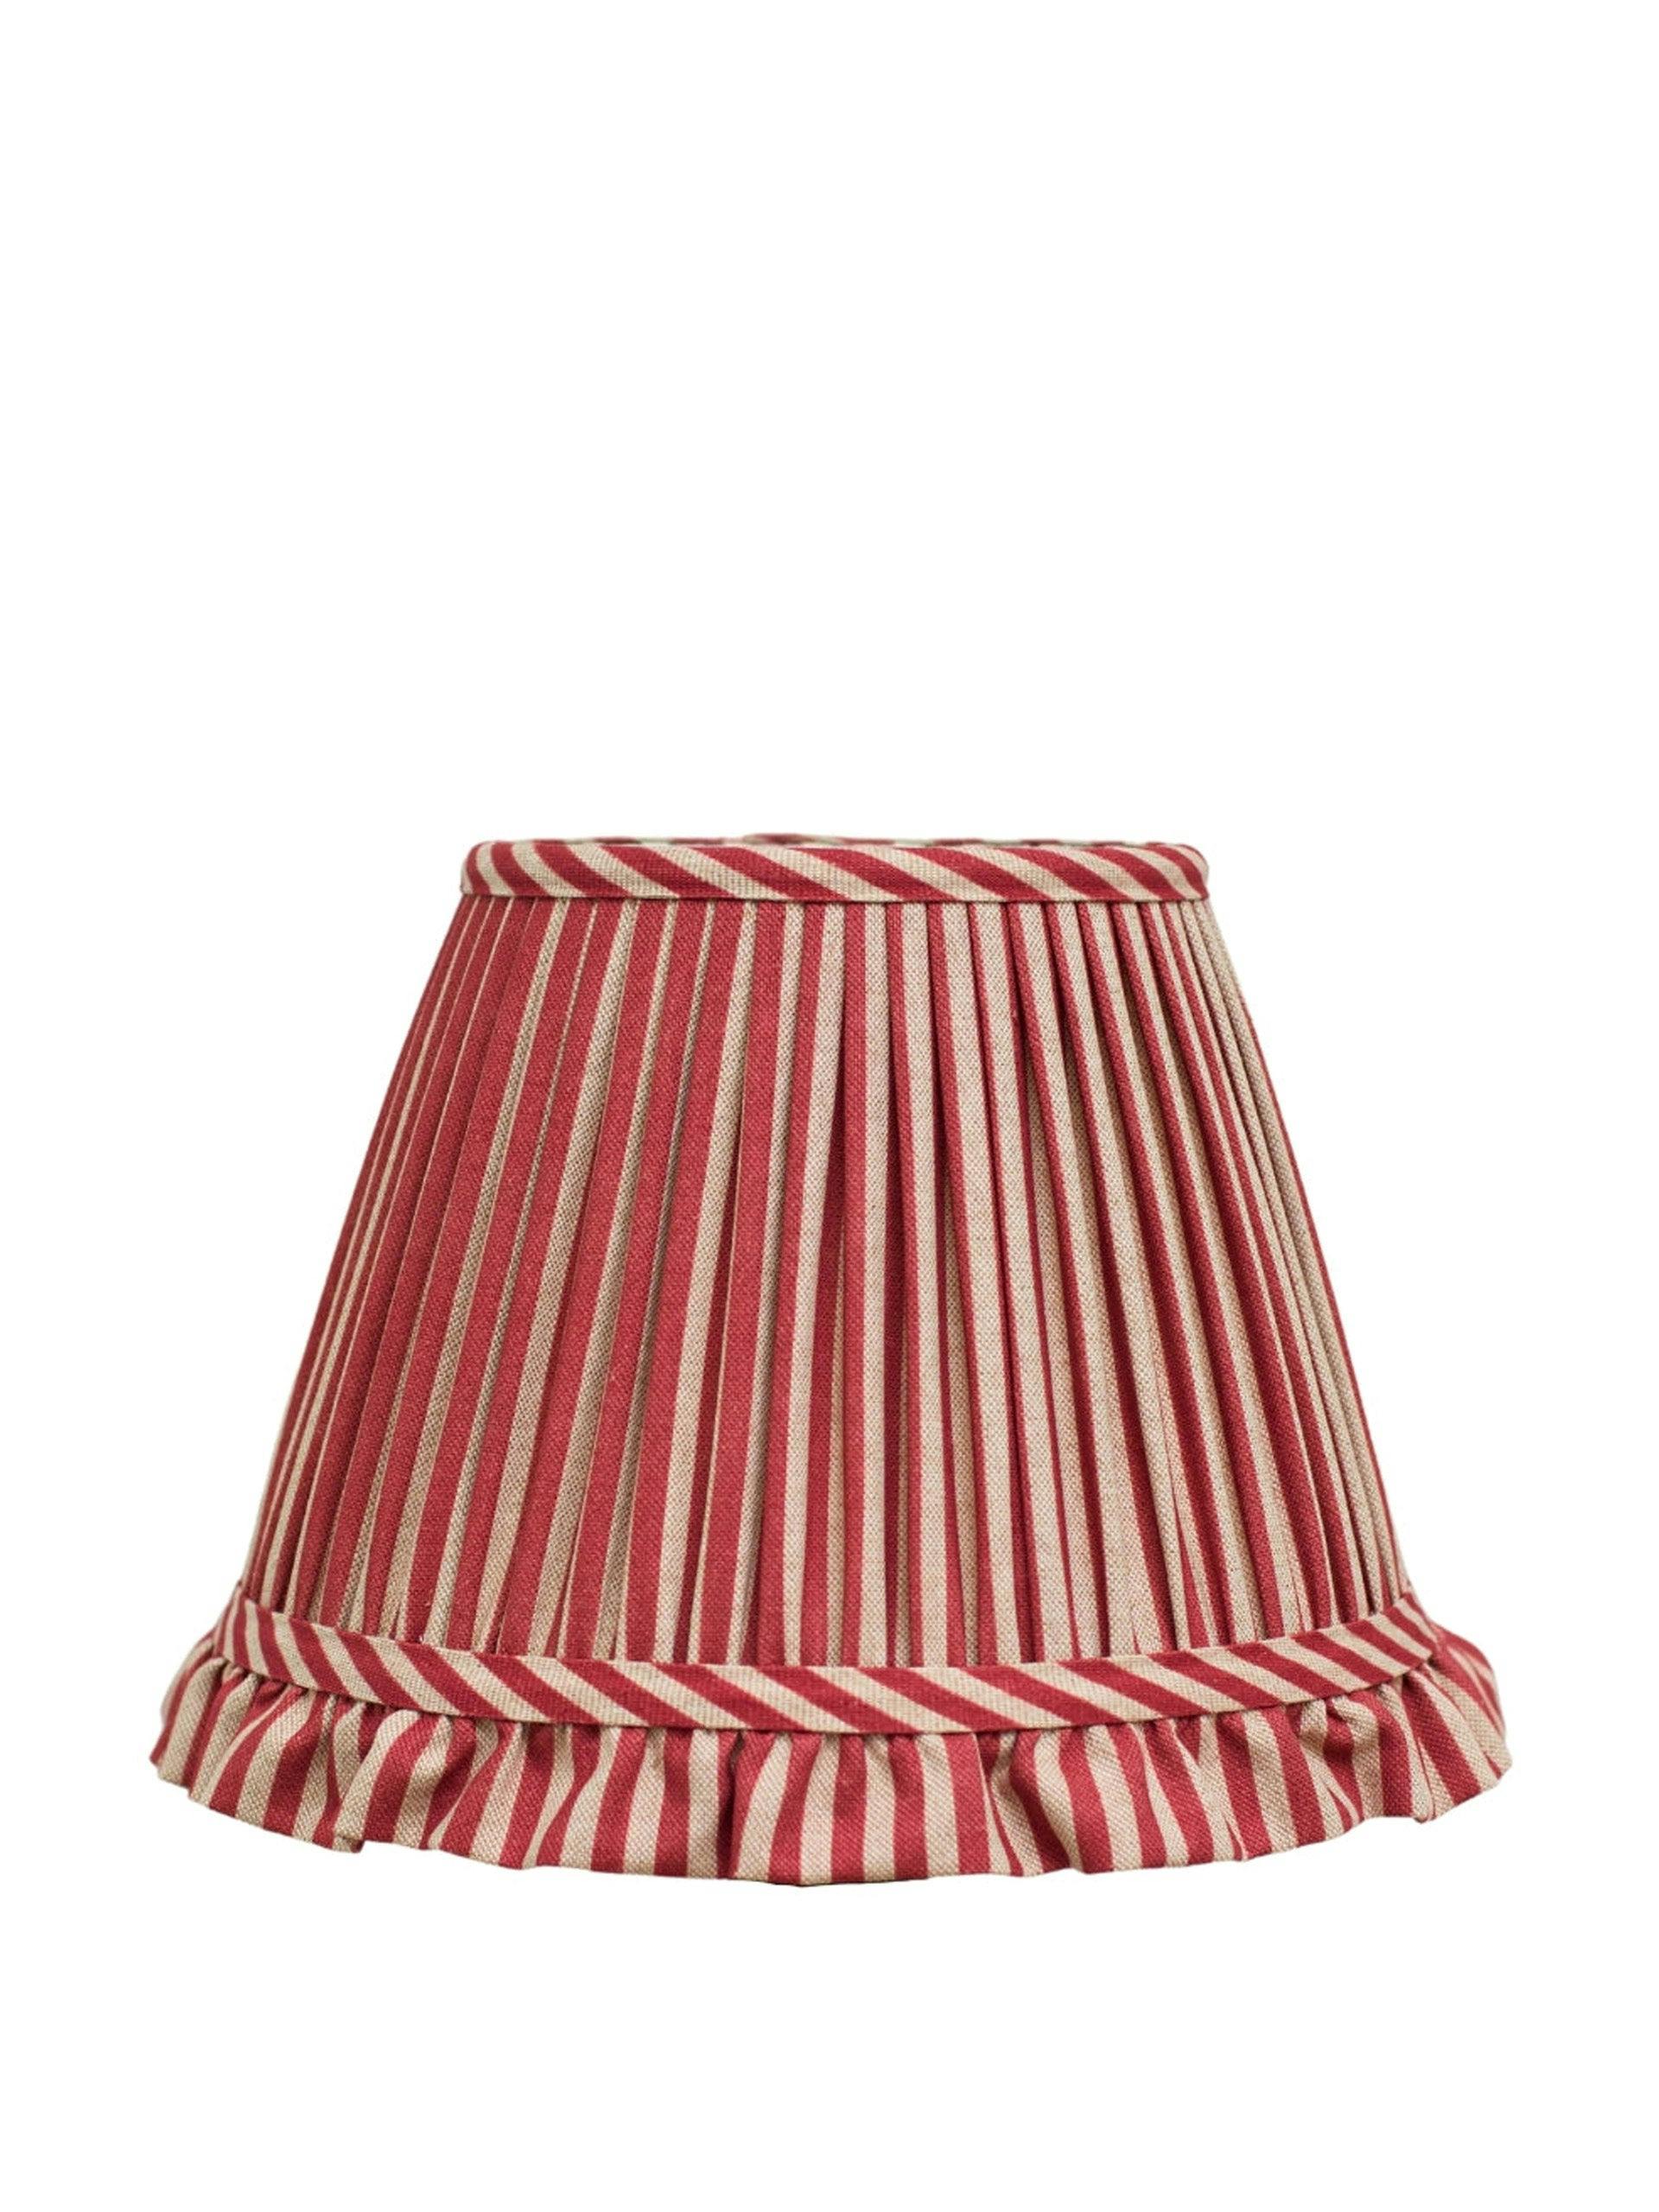 Striped cherry lampshade